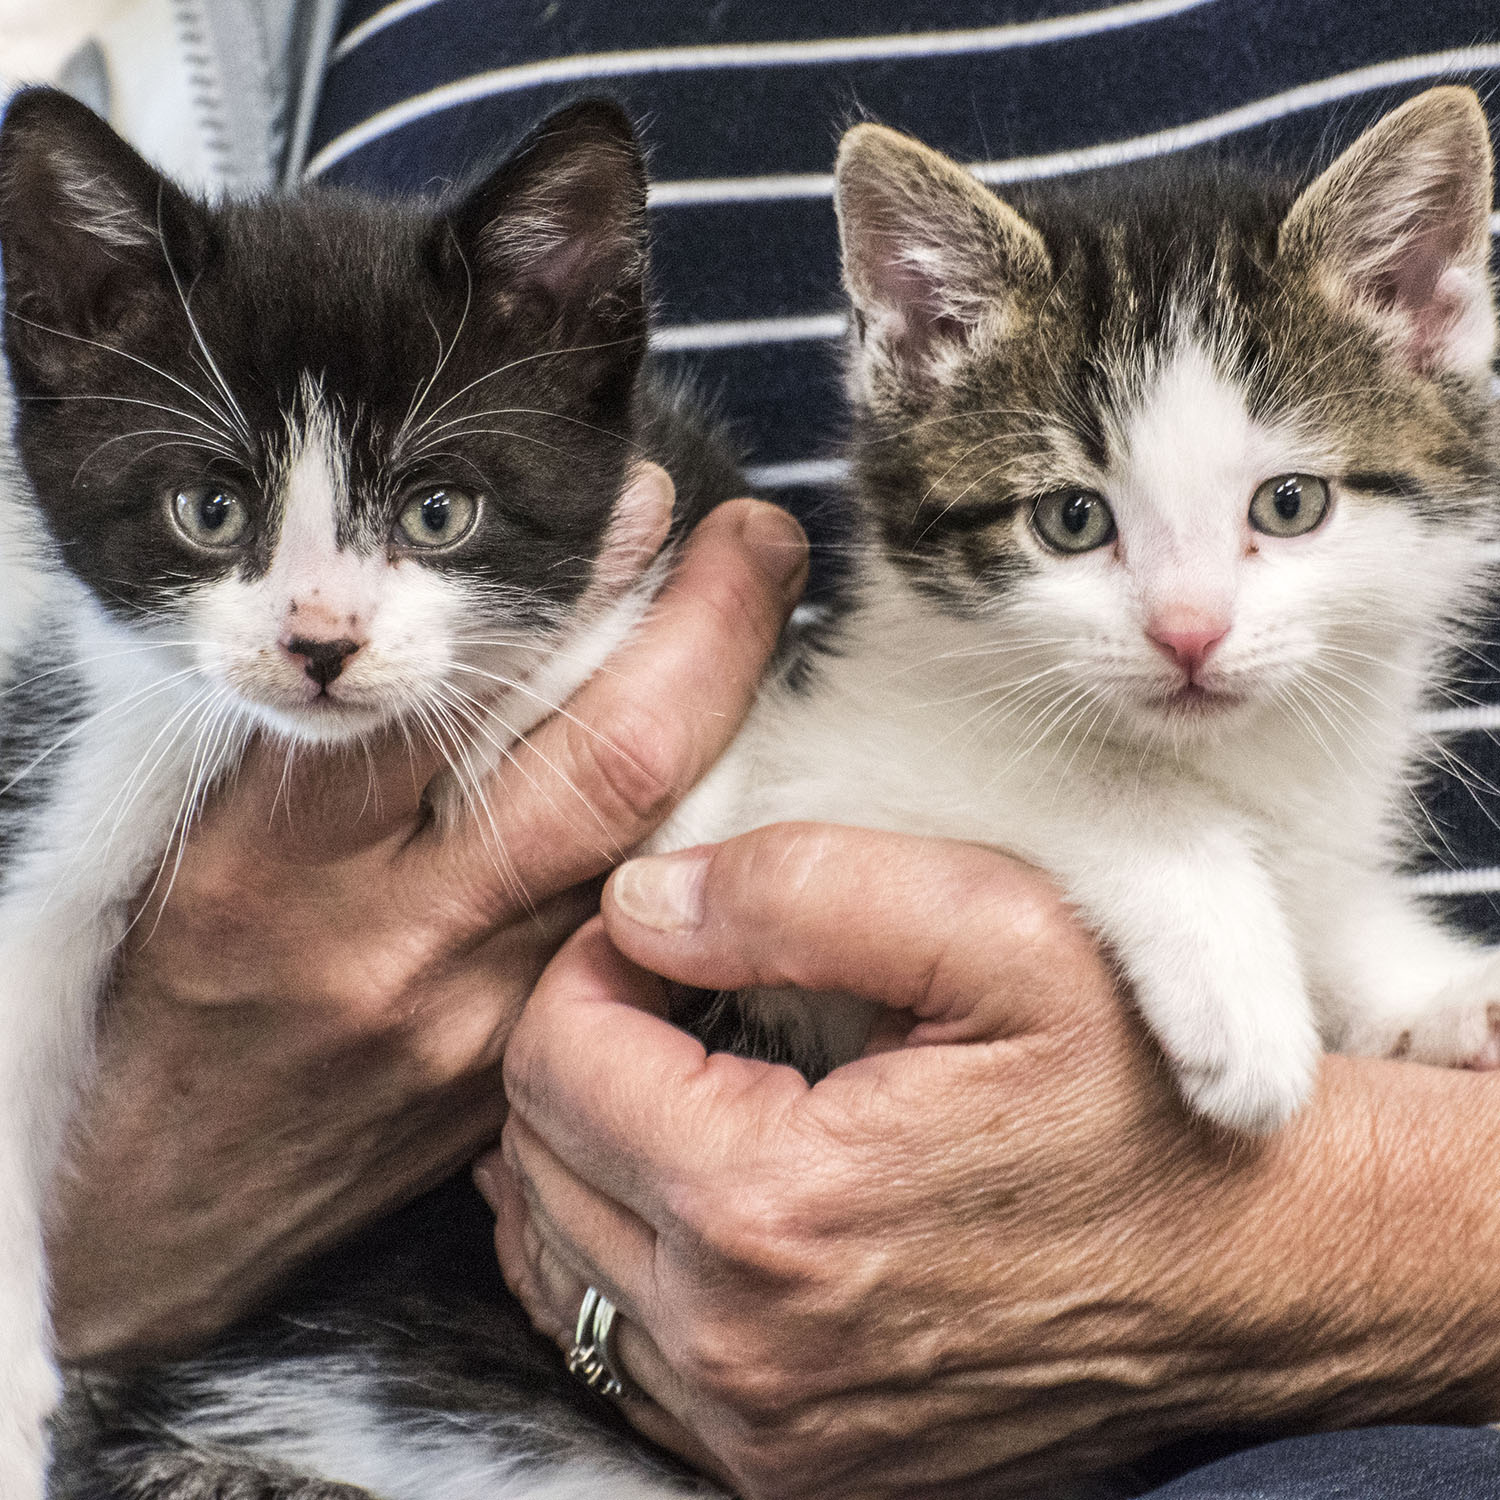 a close-up of two young kittens being held by a person's hands